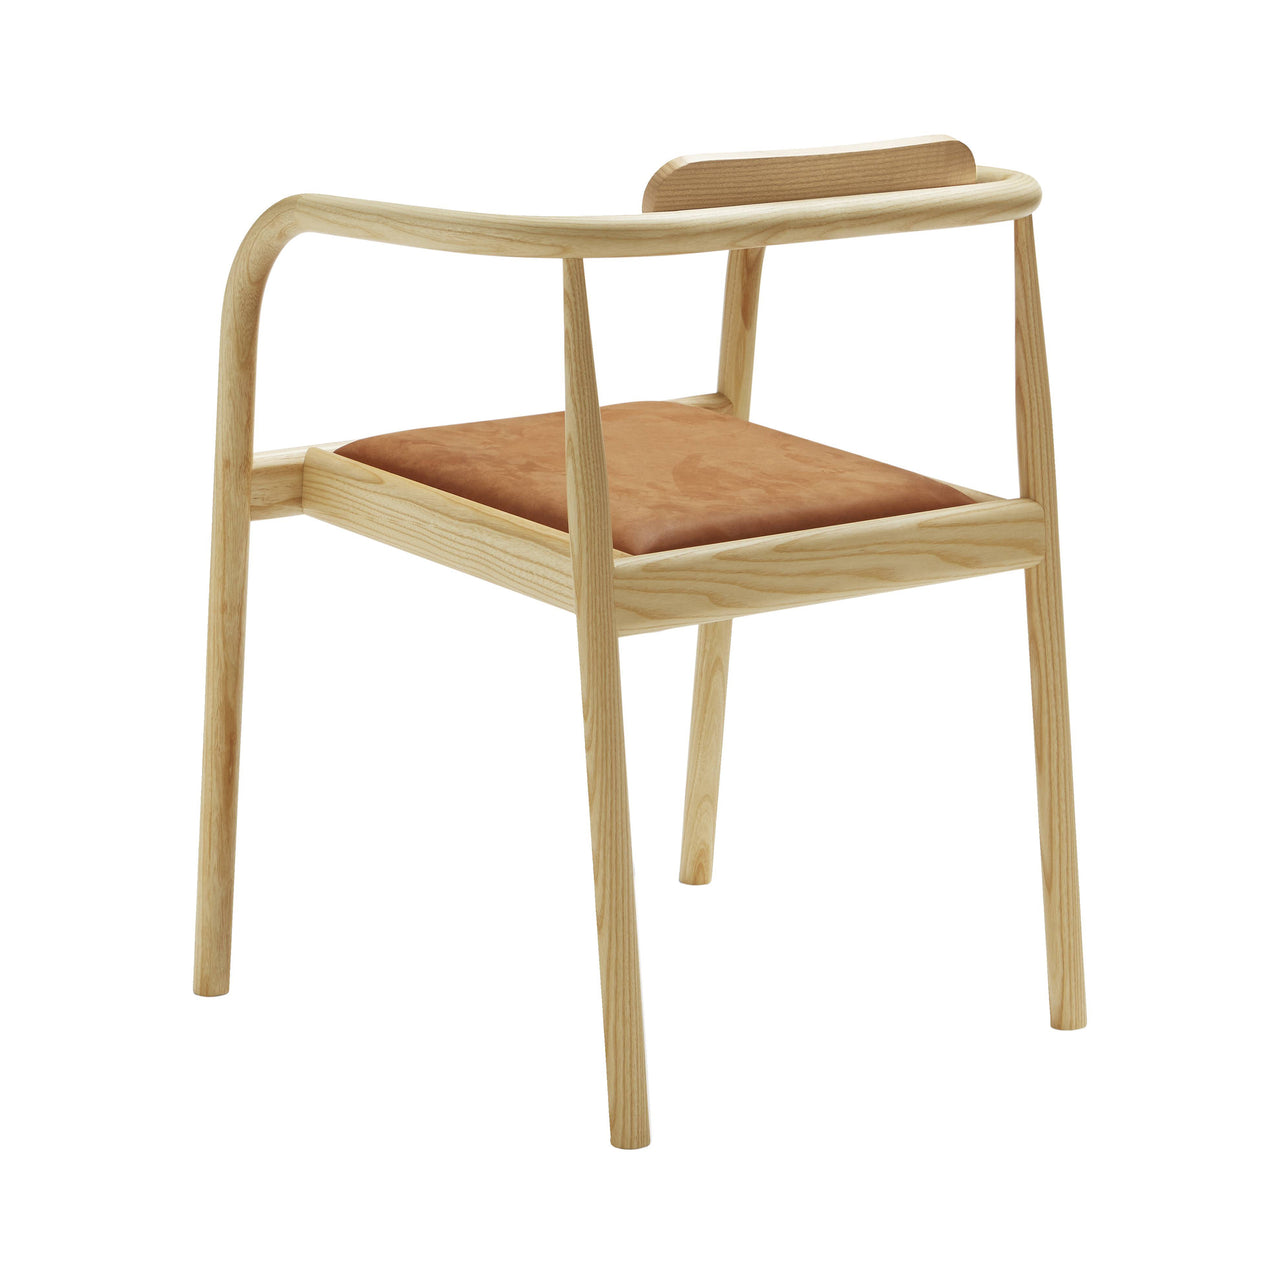 Ahm Chair: Upholstered + Natural Ash